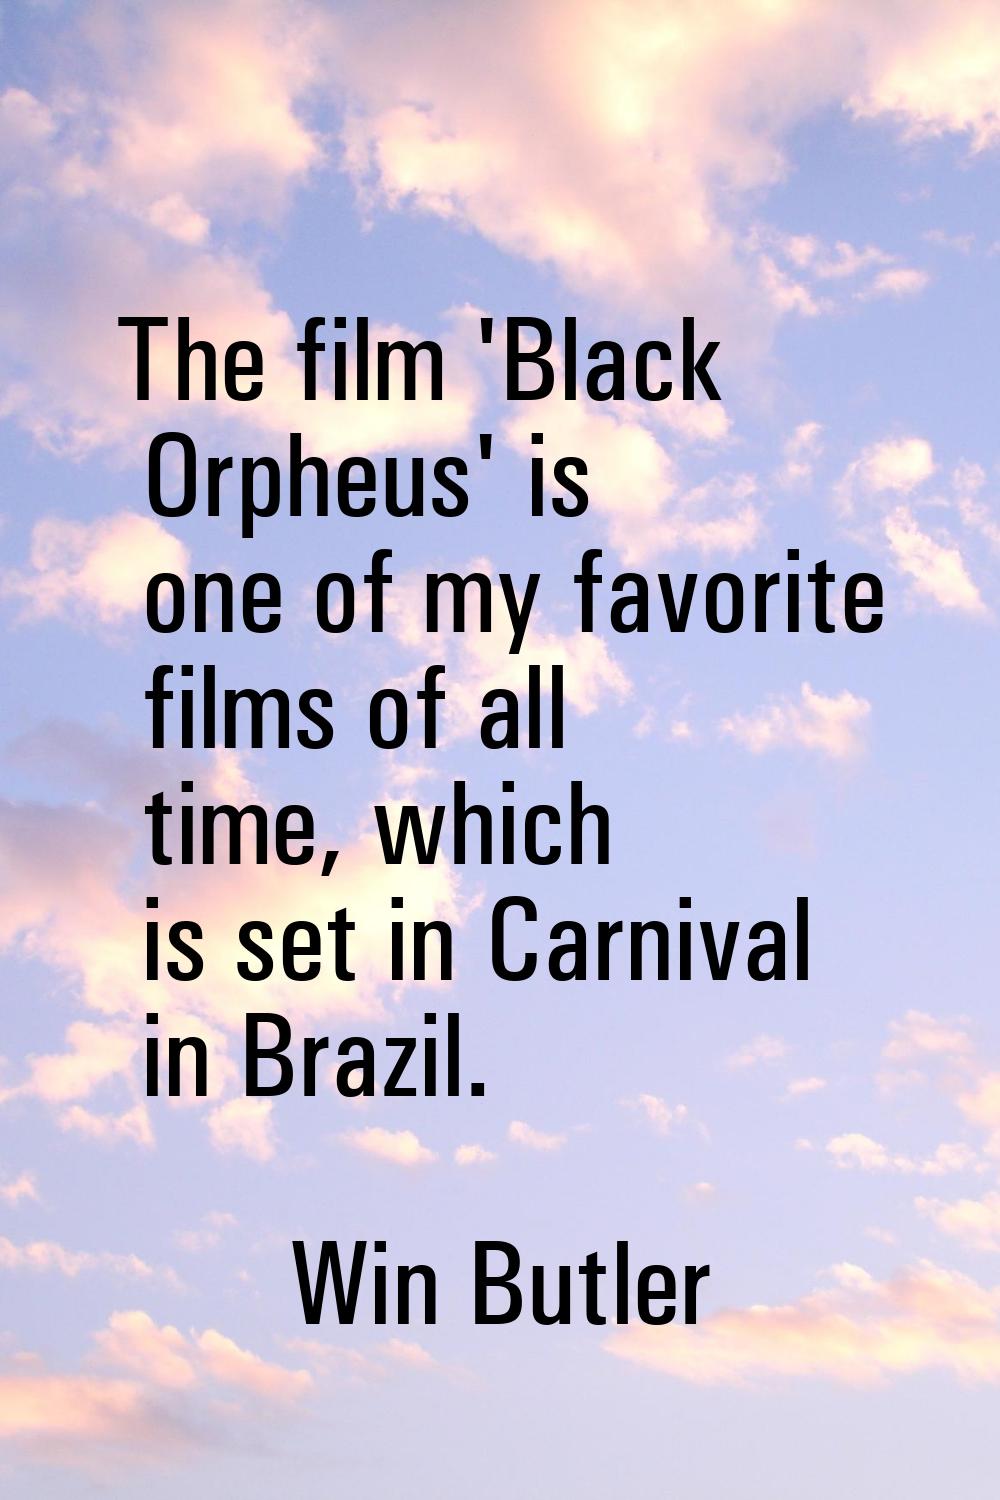 The film 'Black Orpheus' is one of my favorite films of all time, which is set in Carnival in Brazi